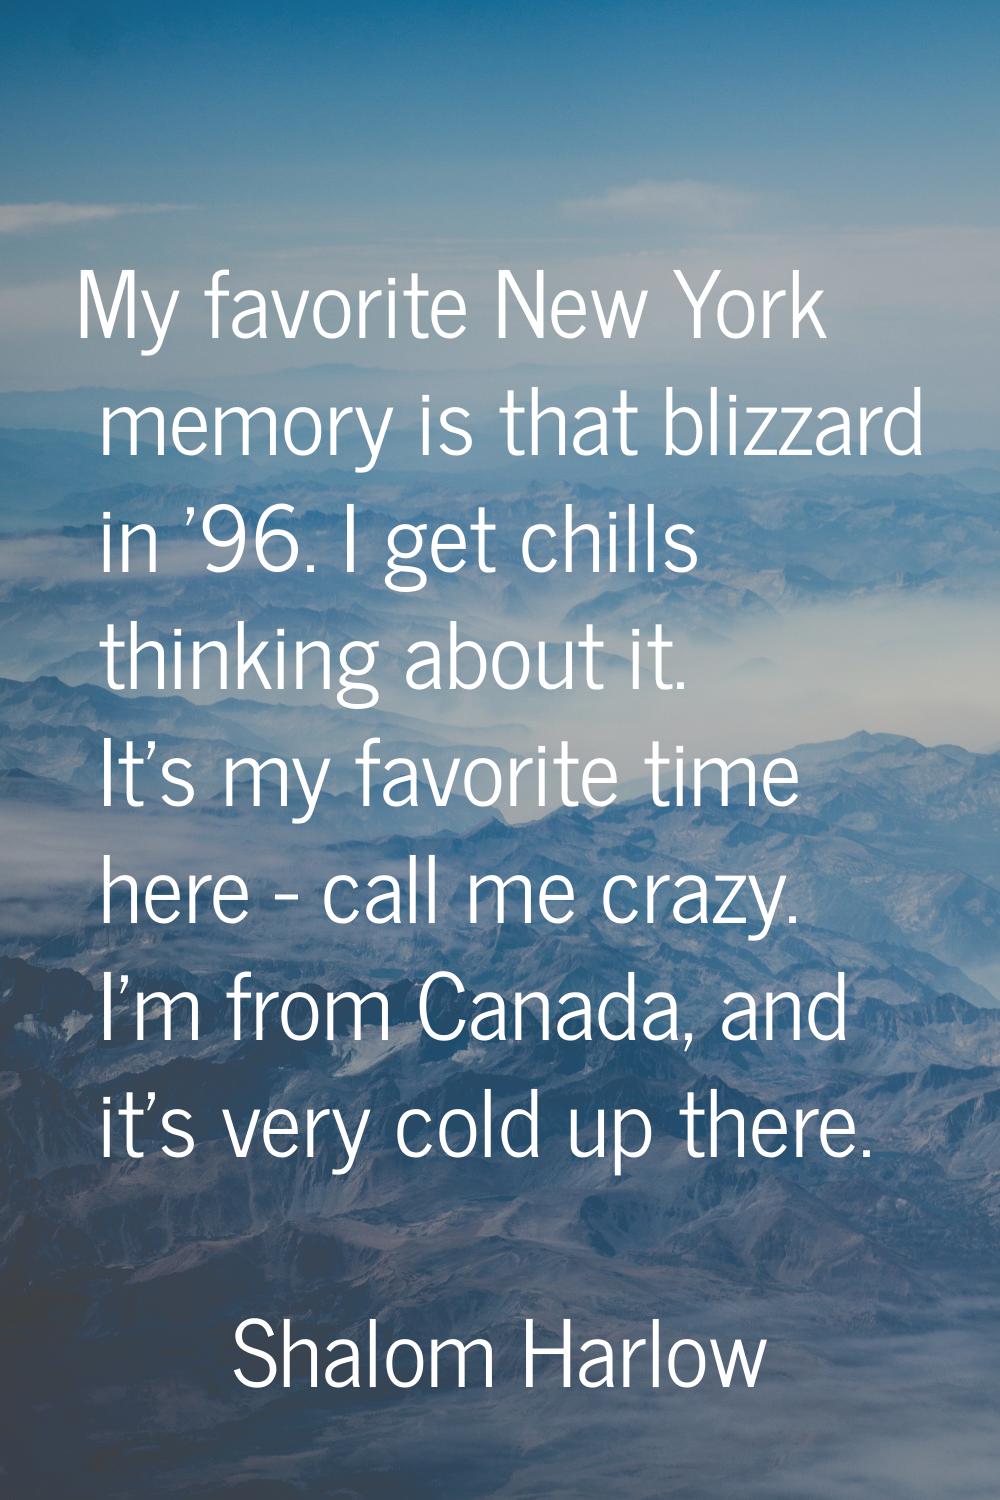 My favorite New York memory is that blizzard in '96. I get chills thinking about it. It's my favori